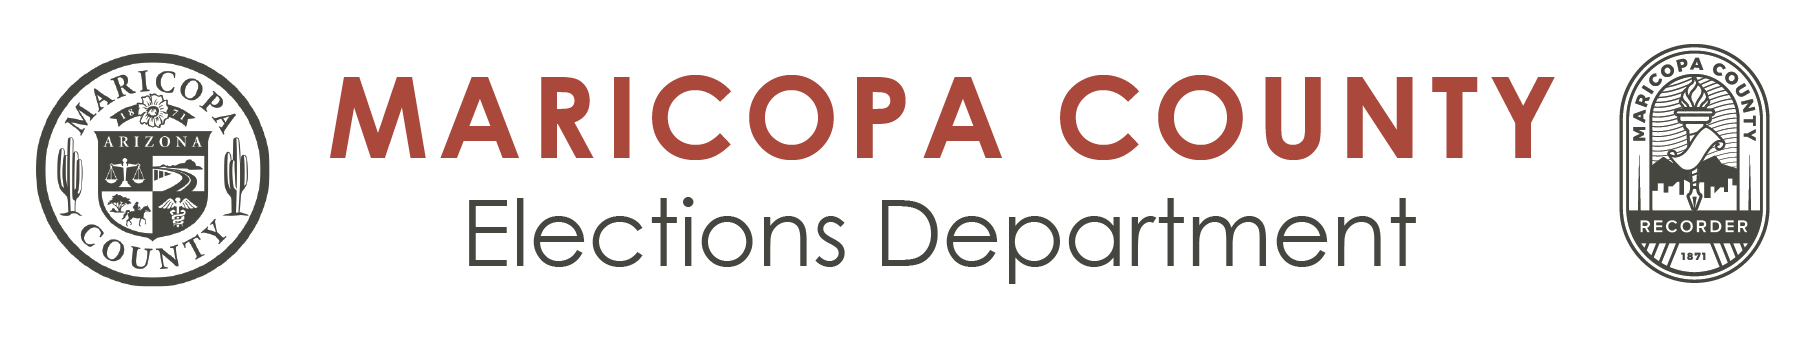 Maricopa County Elections Department Logo